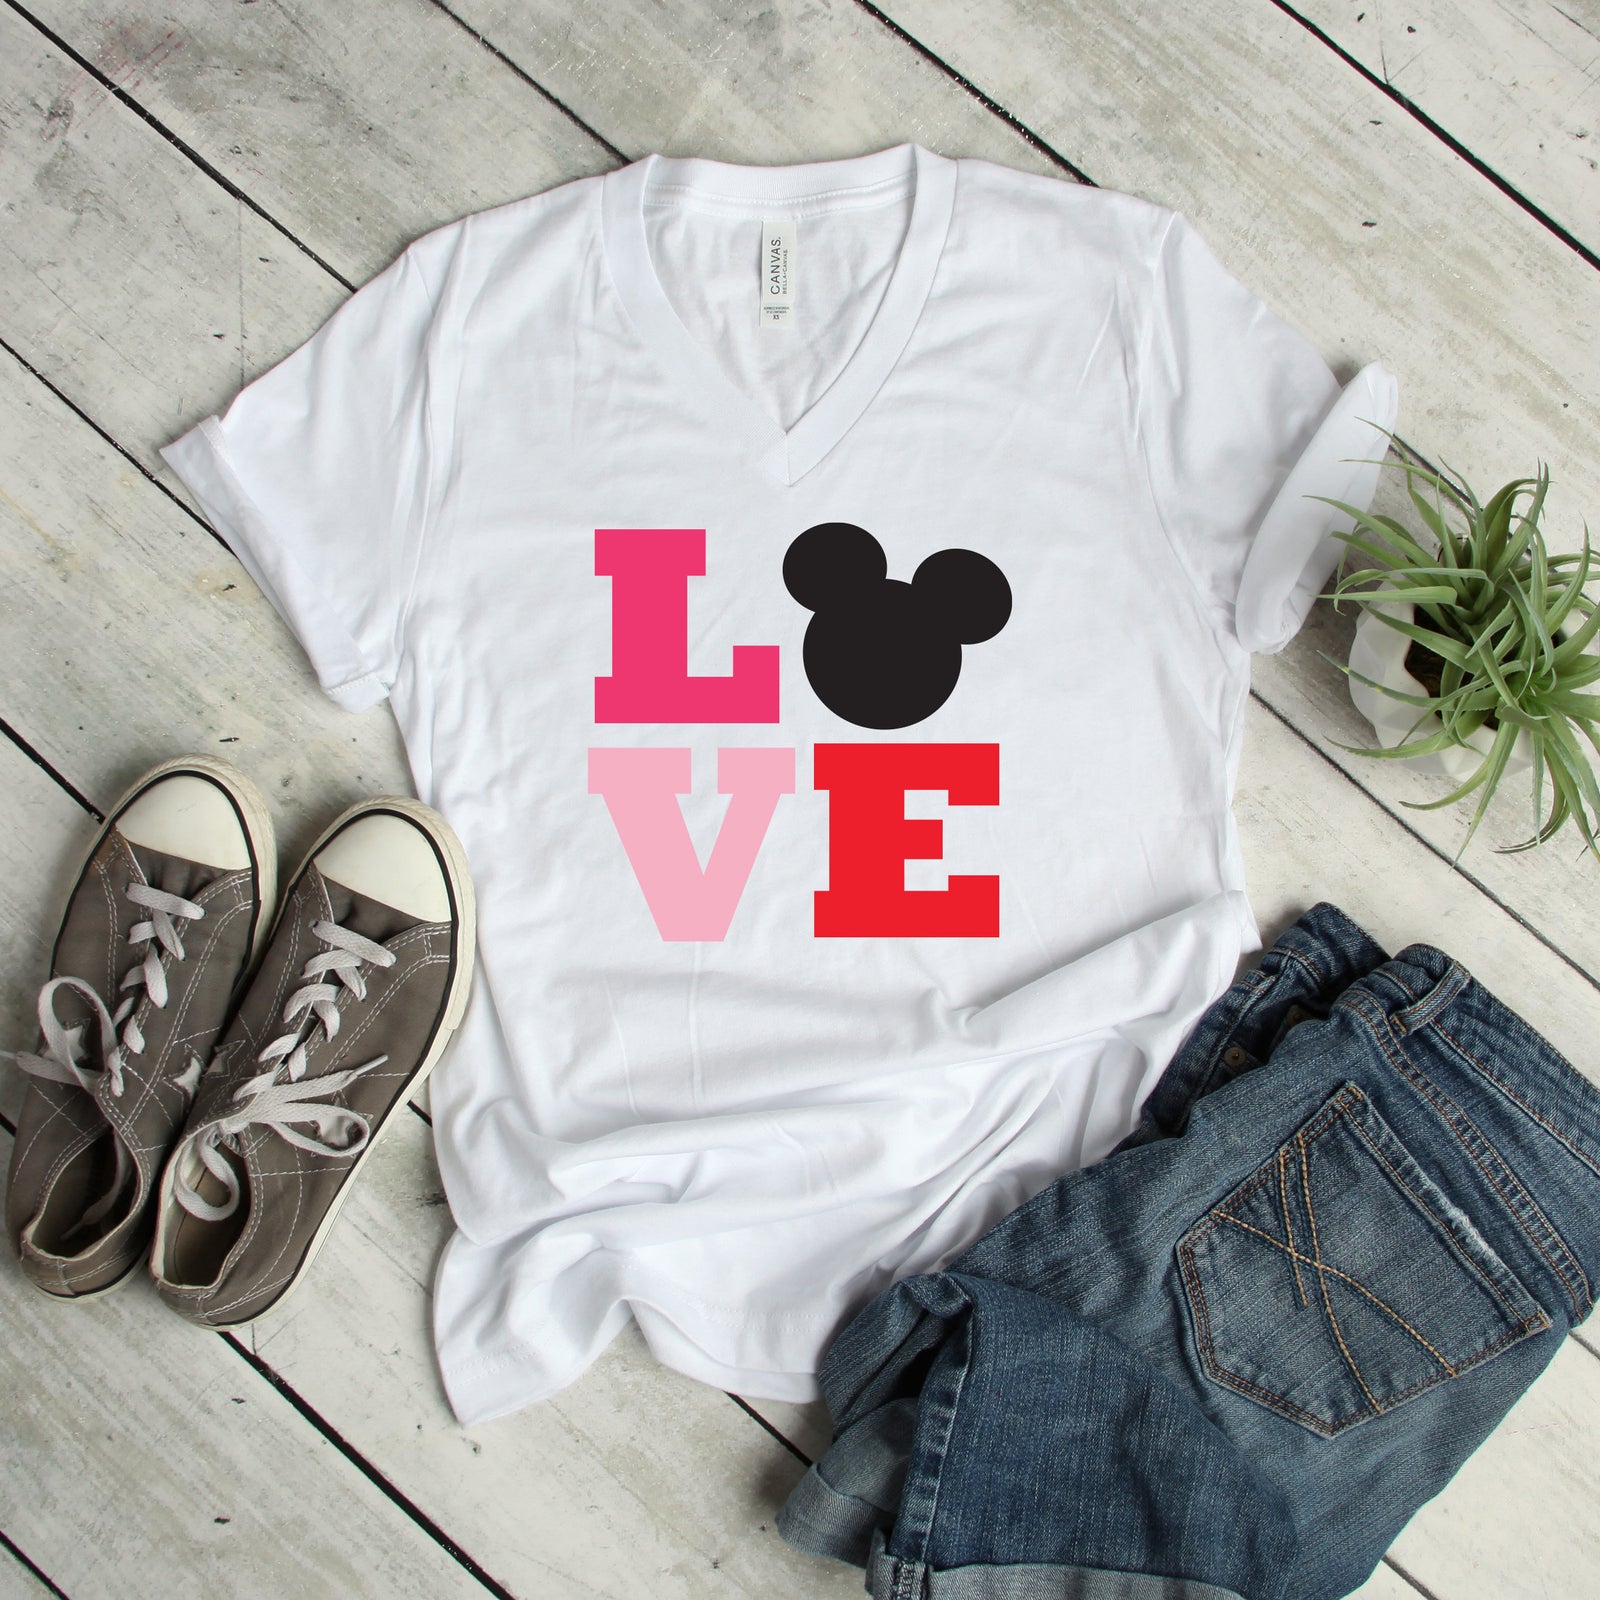 LOVE Block Letters Mickey Mouse T Shirt - Disney Valentine's Day - Mickey Mouse Favorite Tee